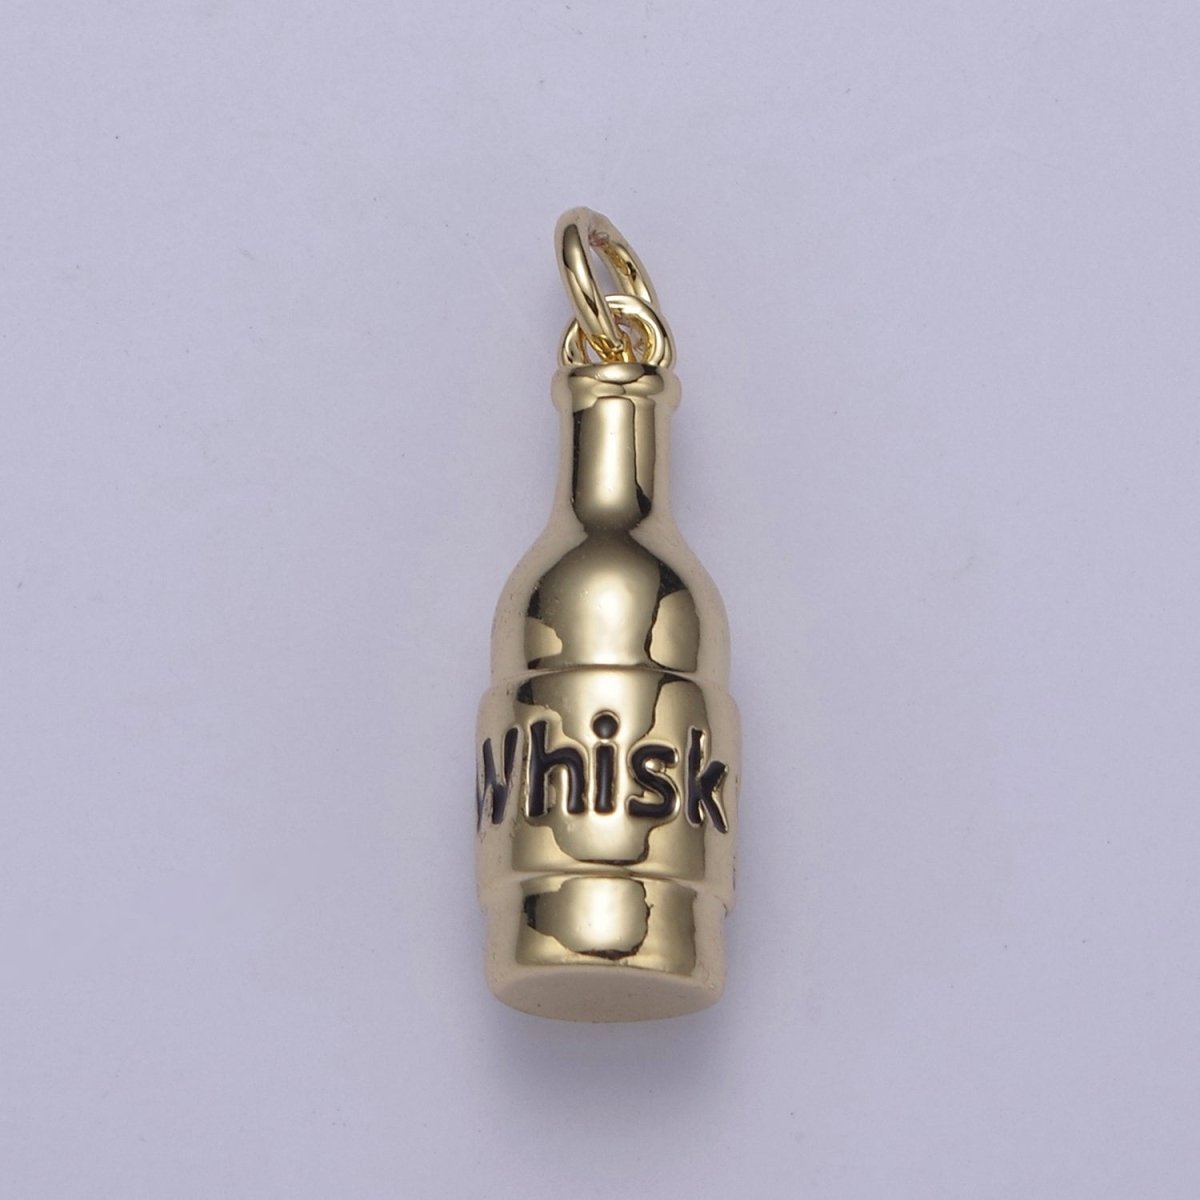 Whisky Bottle Charms Silver / Gold Bottle Charms, Jewelry Supply Wholesale N-662 N-663 - DLUXCA